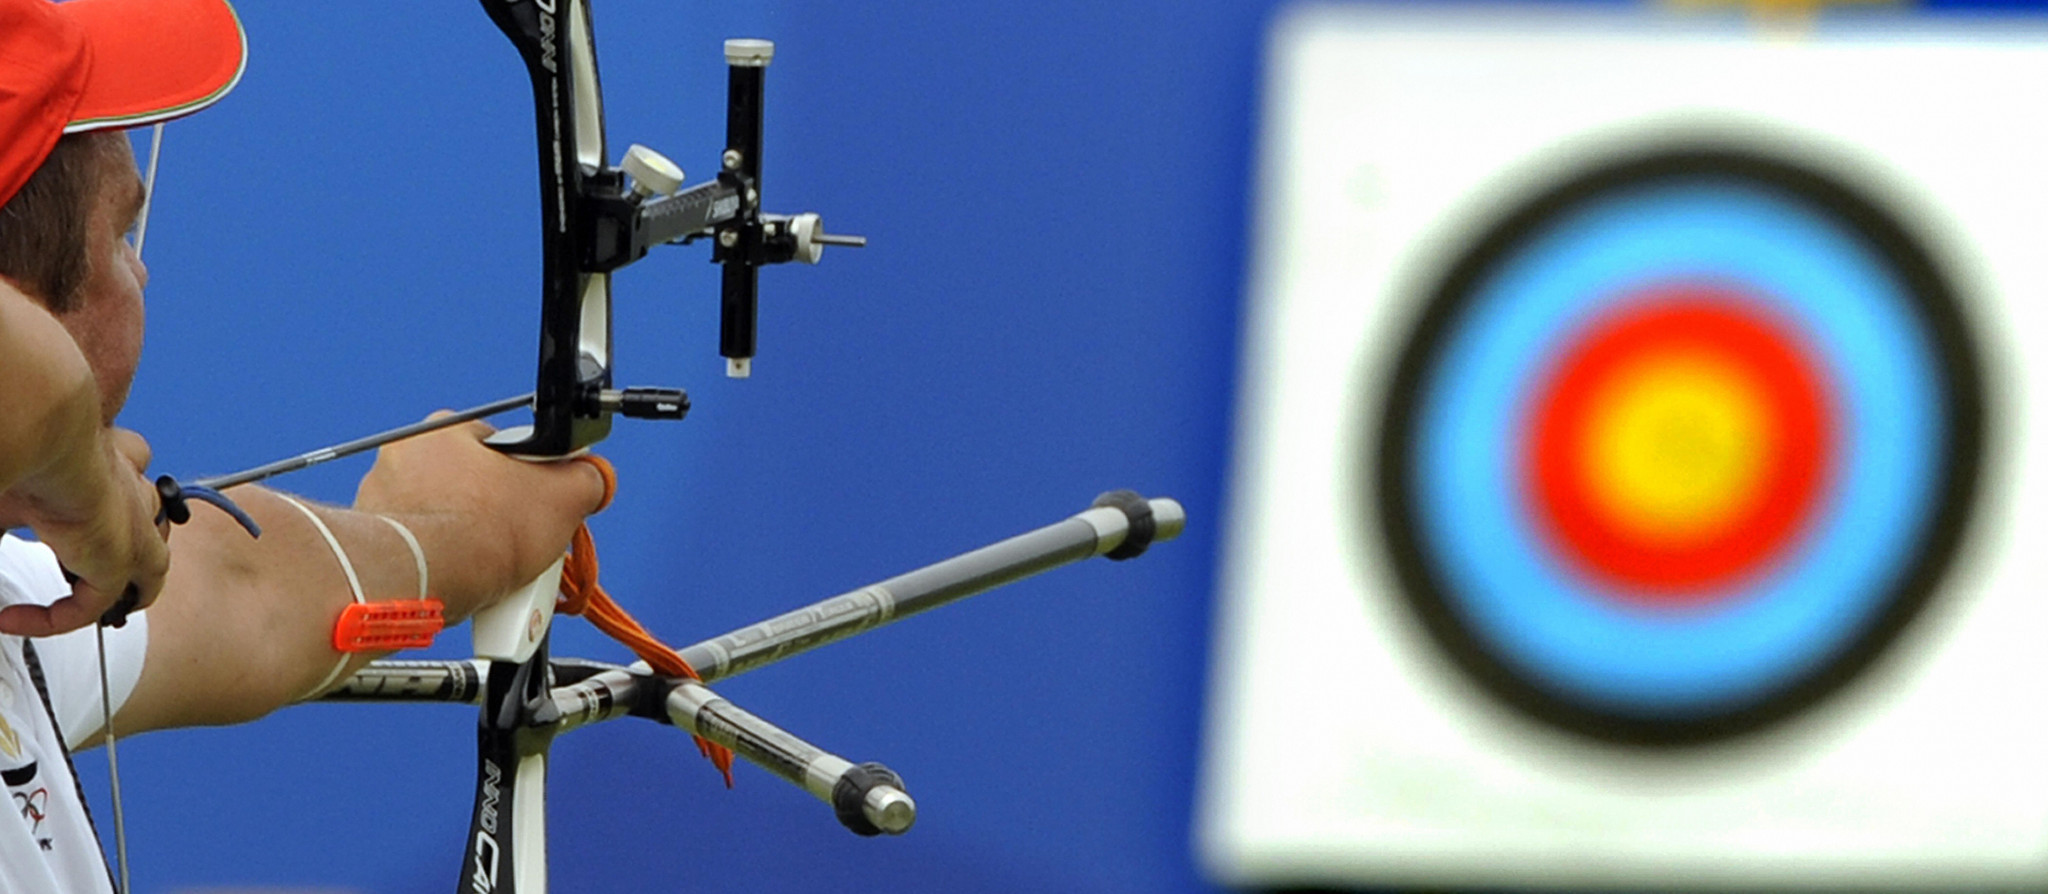 Minsk will hold an archery event in May to help prepare for the 2019 European Games ©Getty Images